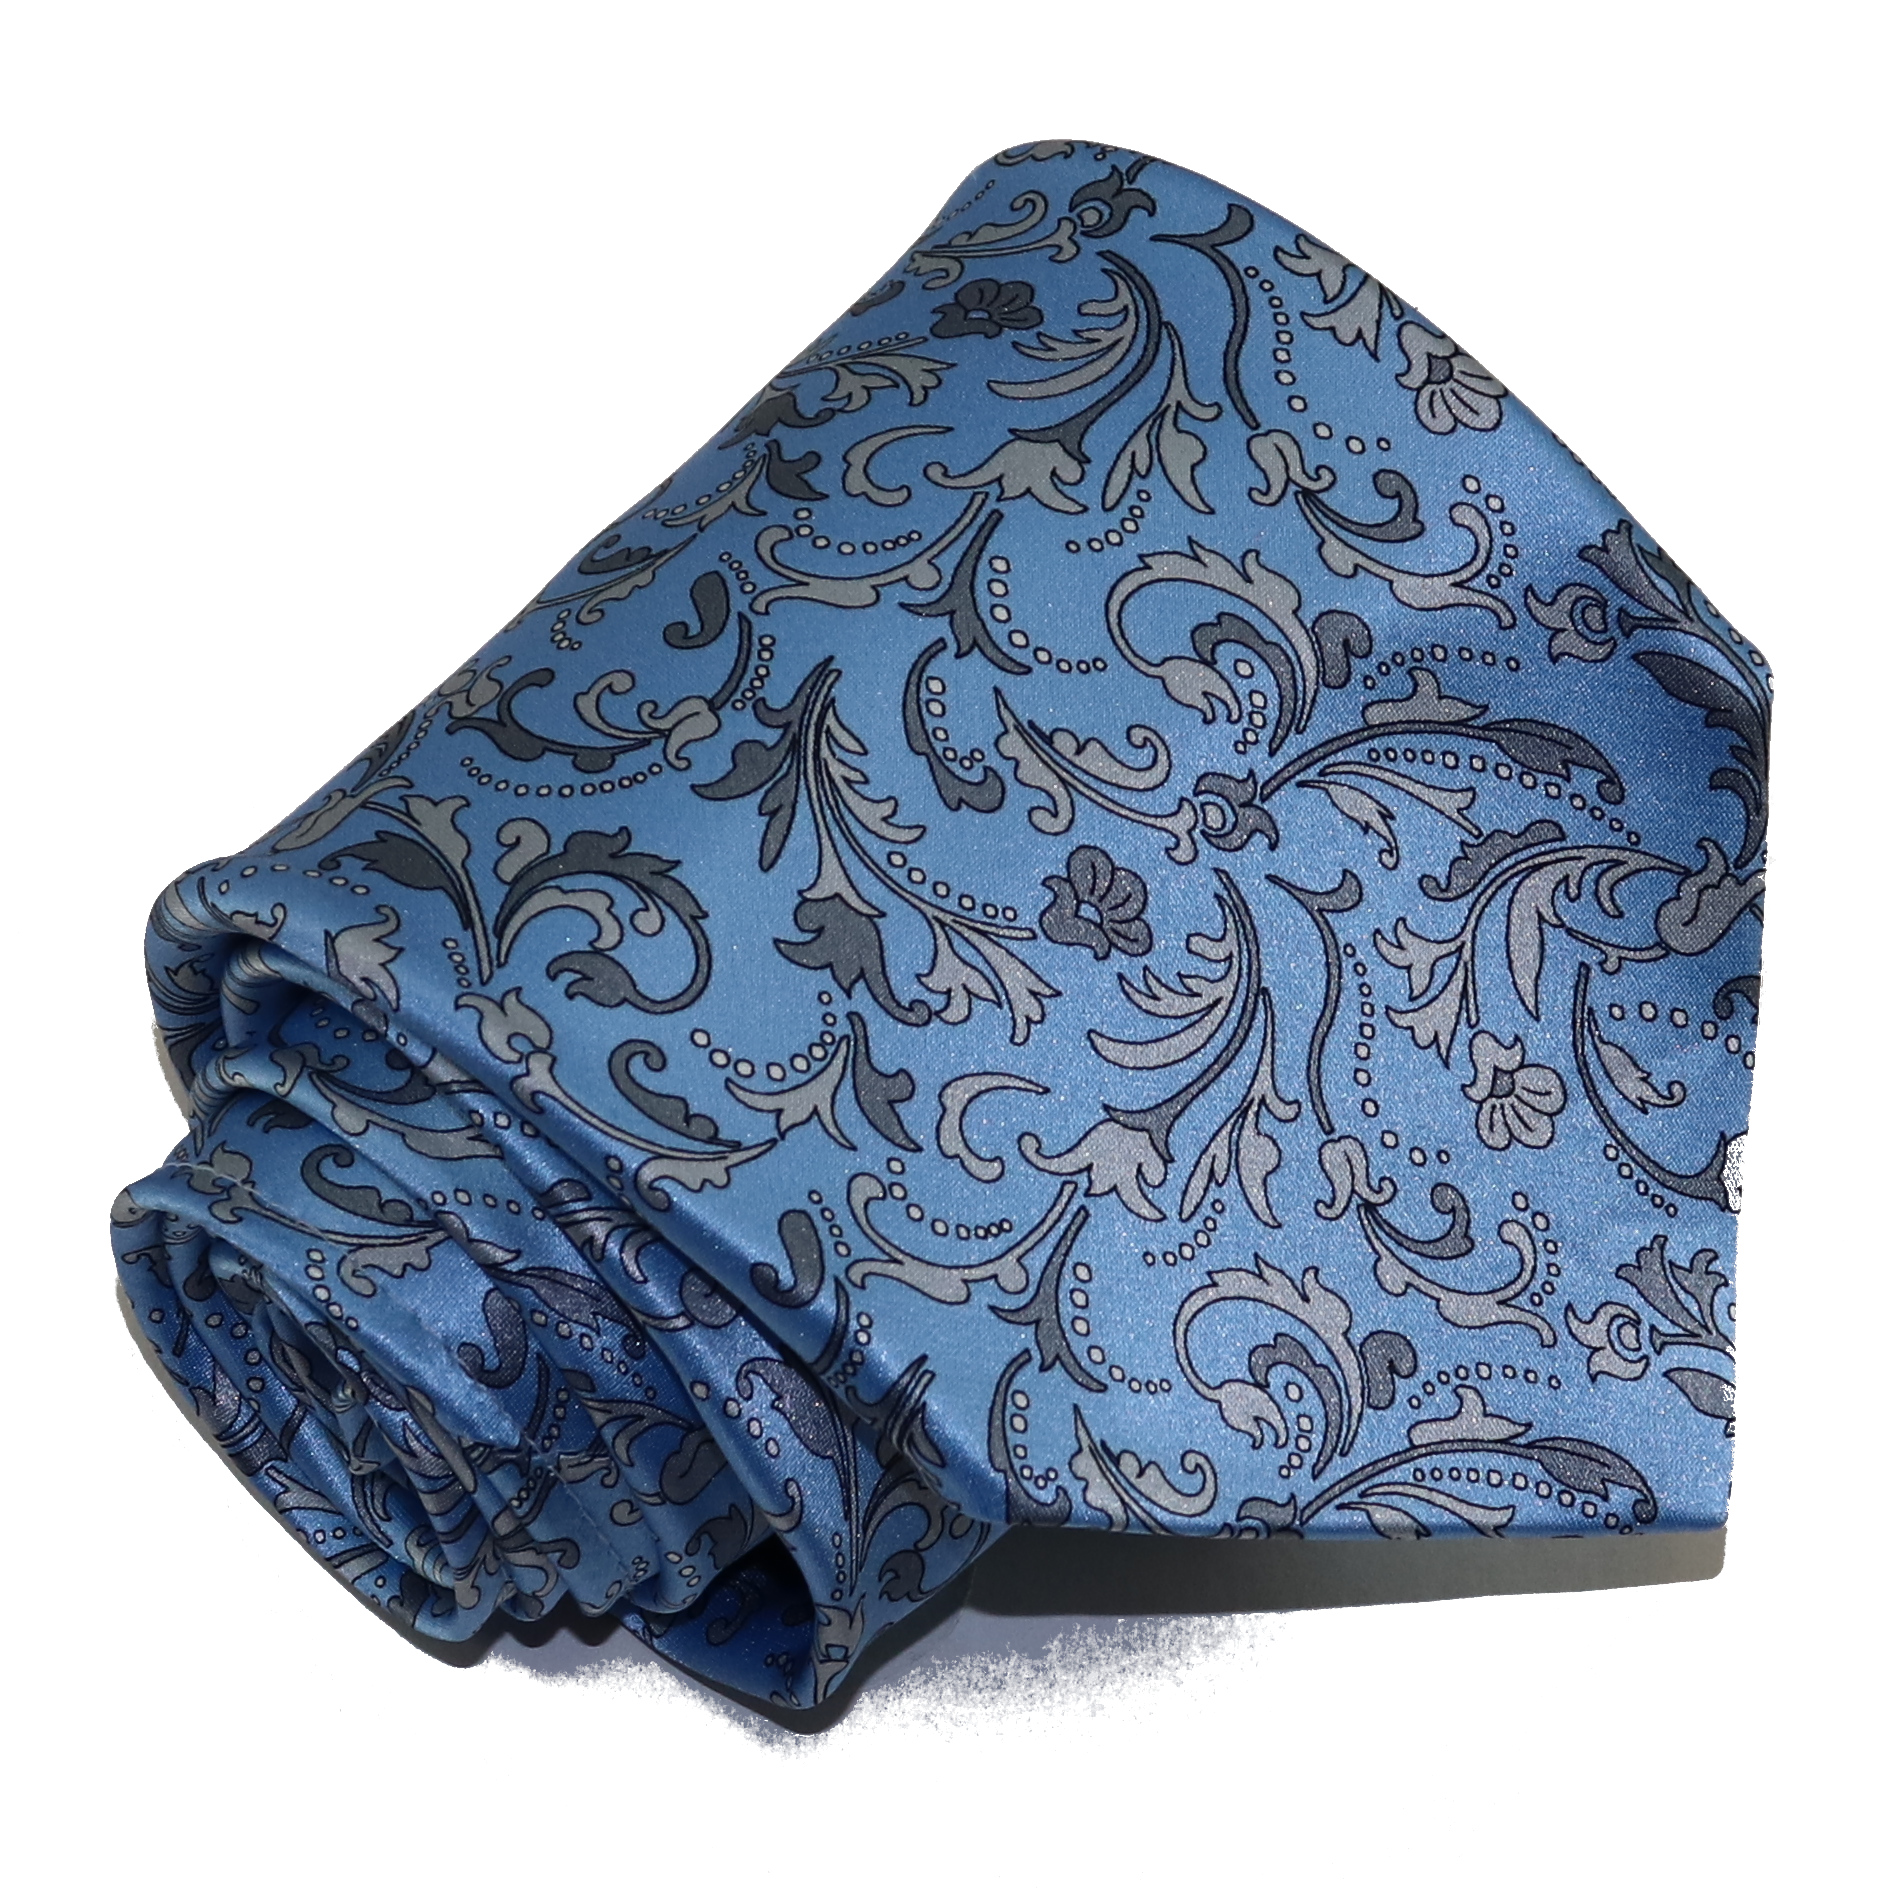 Light blue luxuty tie with floral ramage pattern, 100% pure silk ...